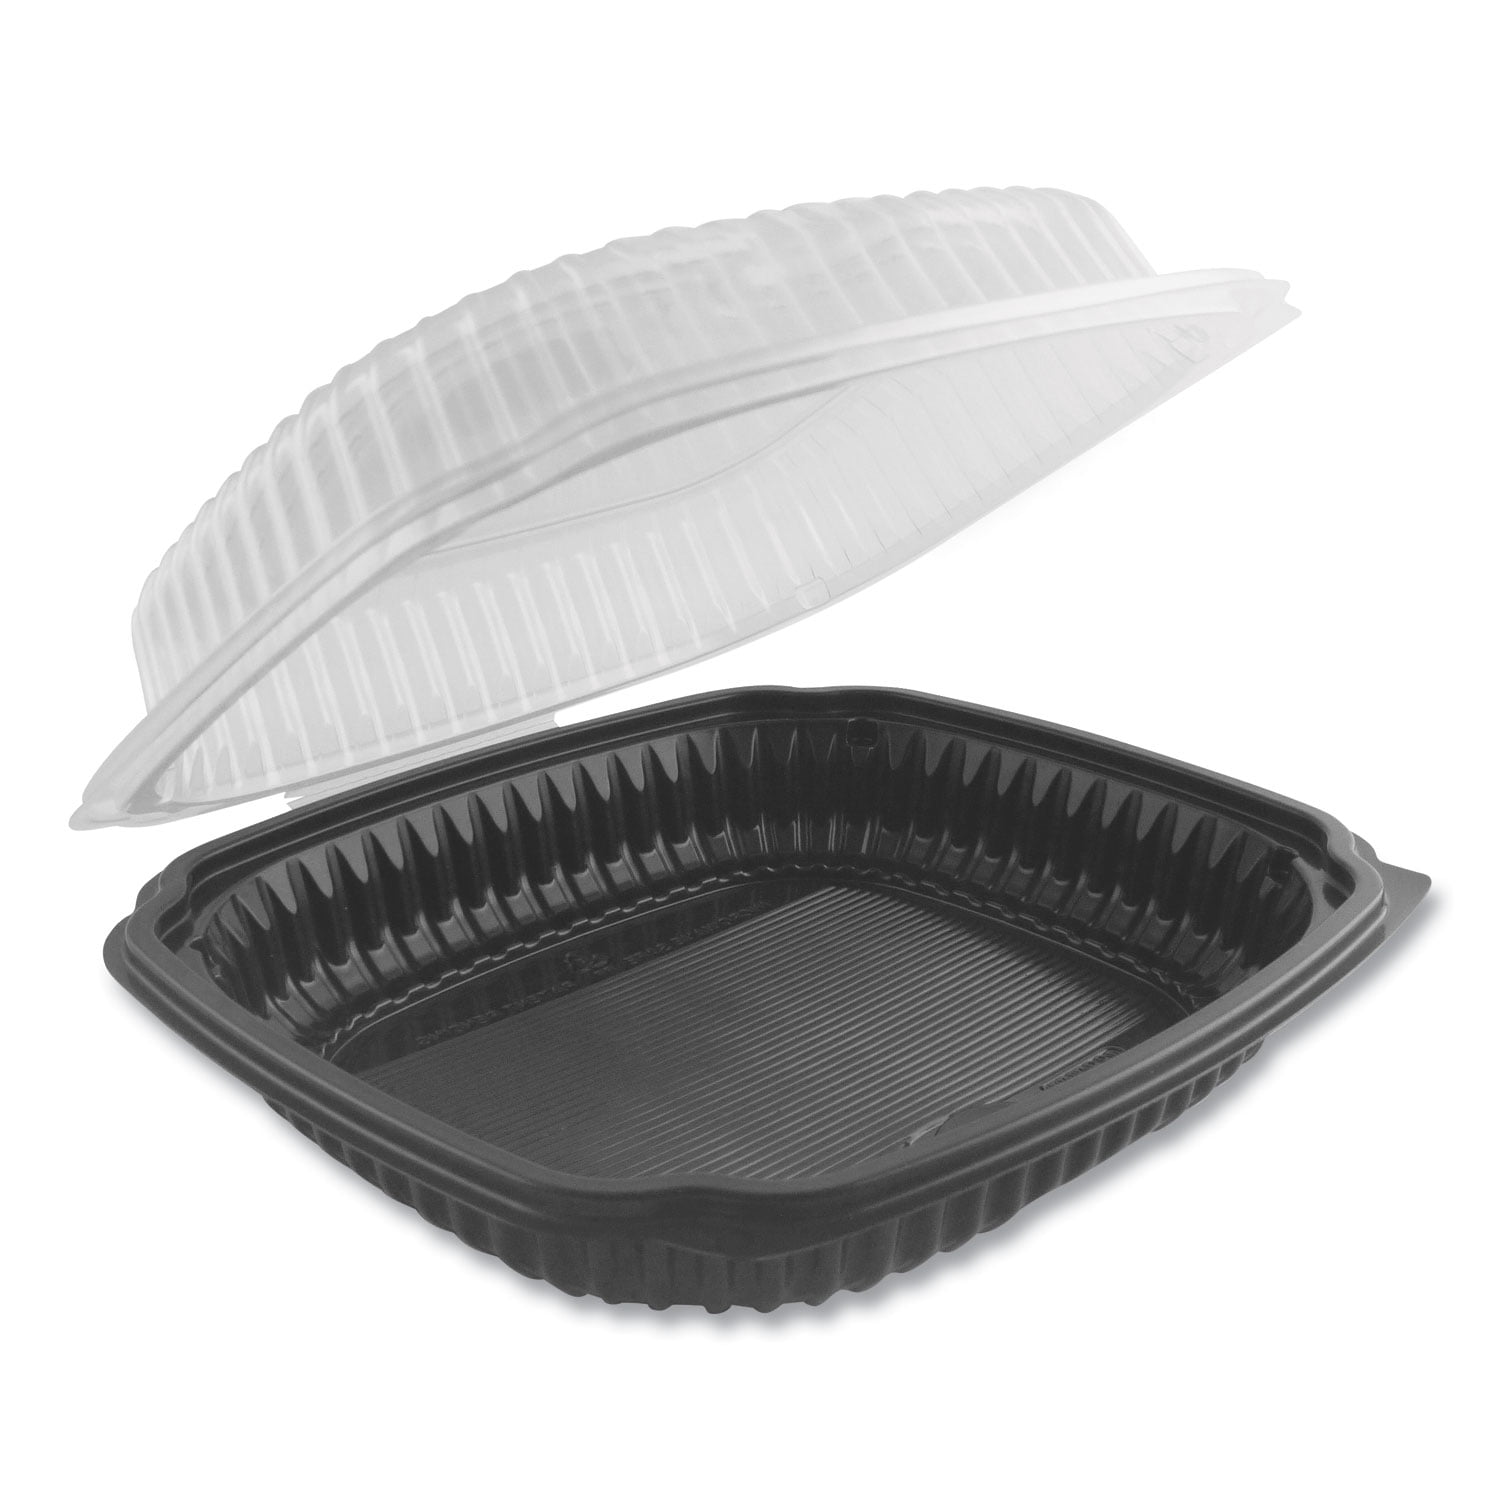 4699610 R3j 10.5 X 9.5 In. 1-comparment Hinged Polpropylene Container, Black & Clear - Case Of 100